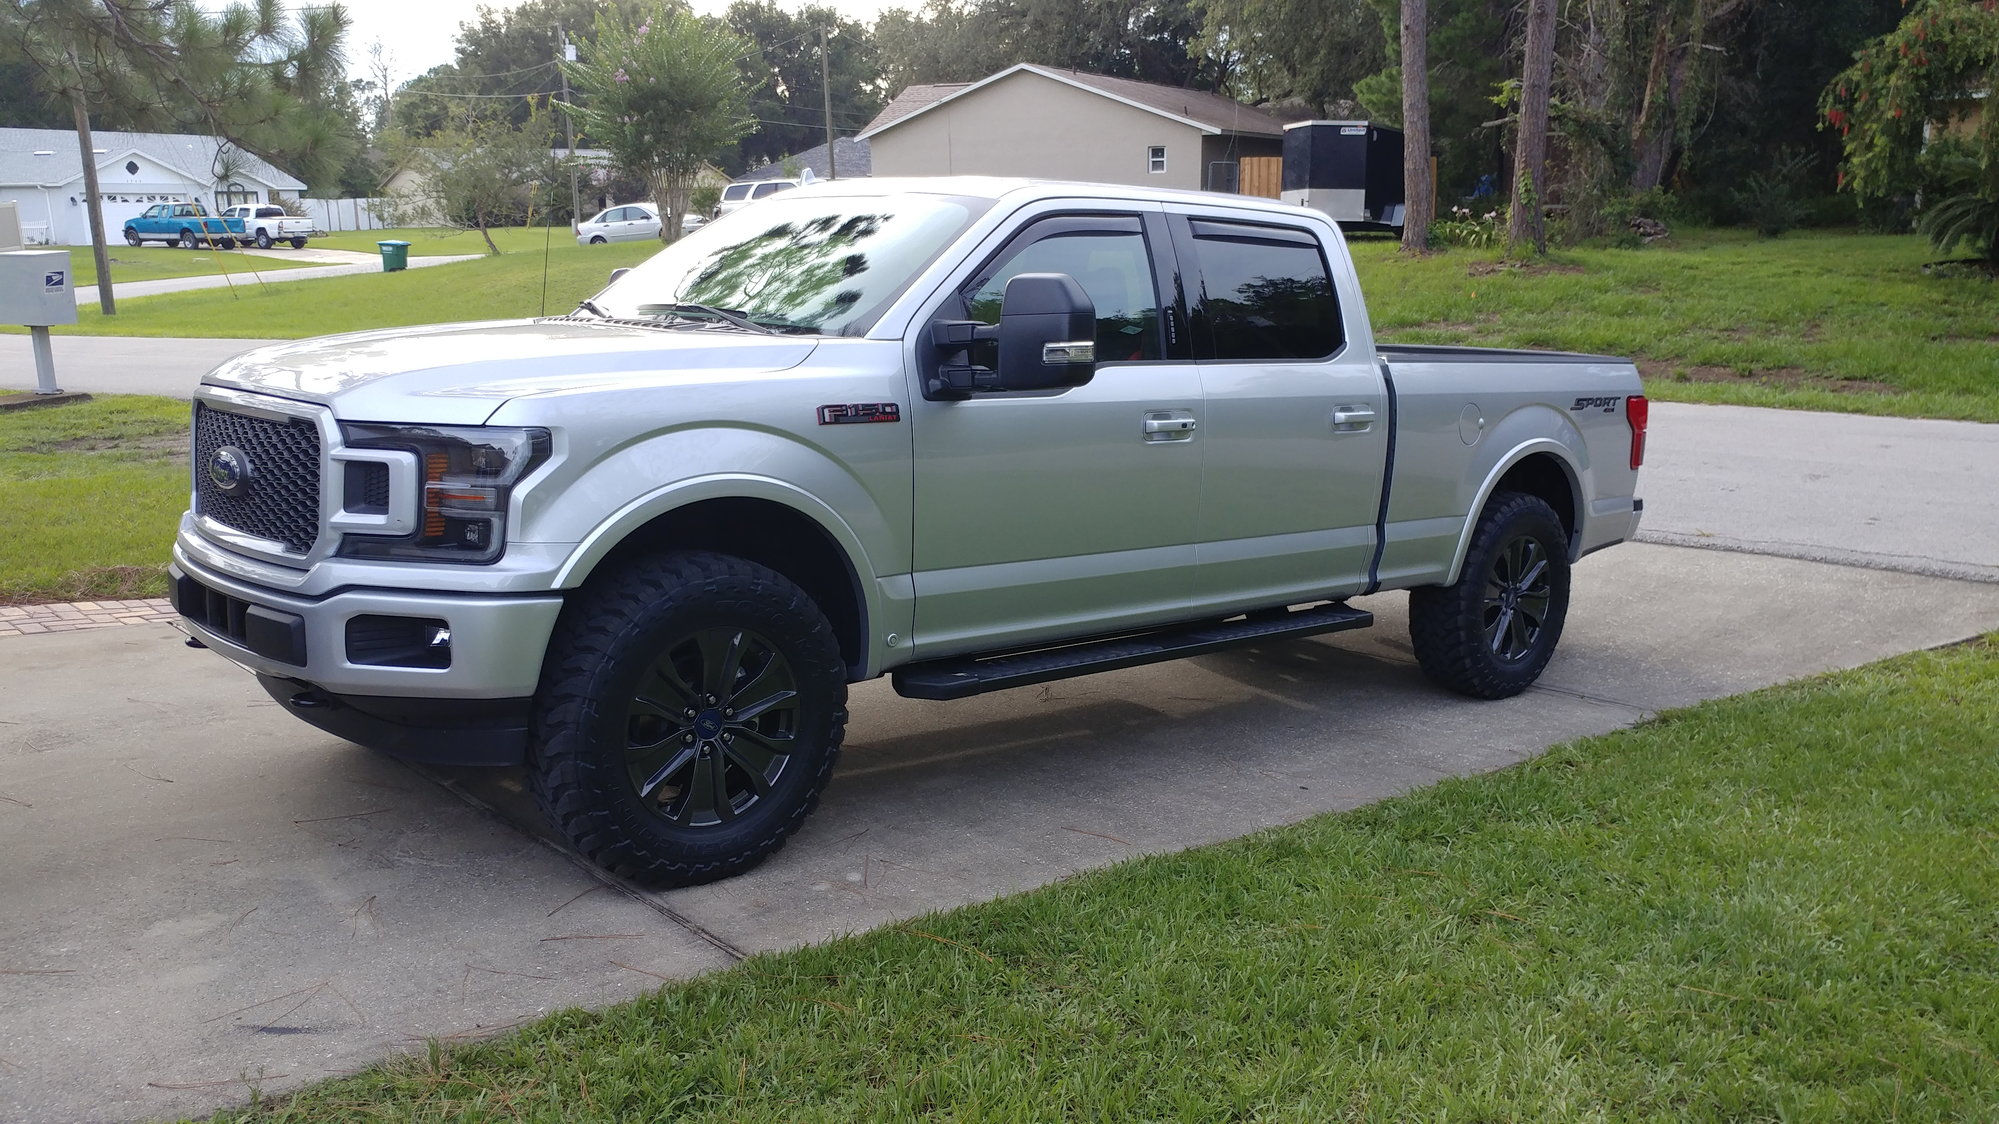 Tires with stock rims on 2016 XLT Sport - Page 3 - Ford F150 Forum